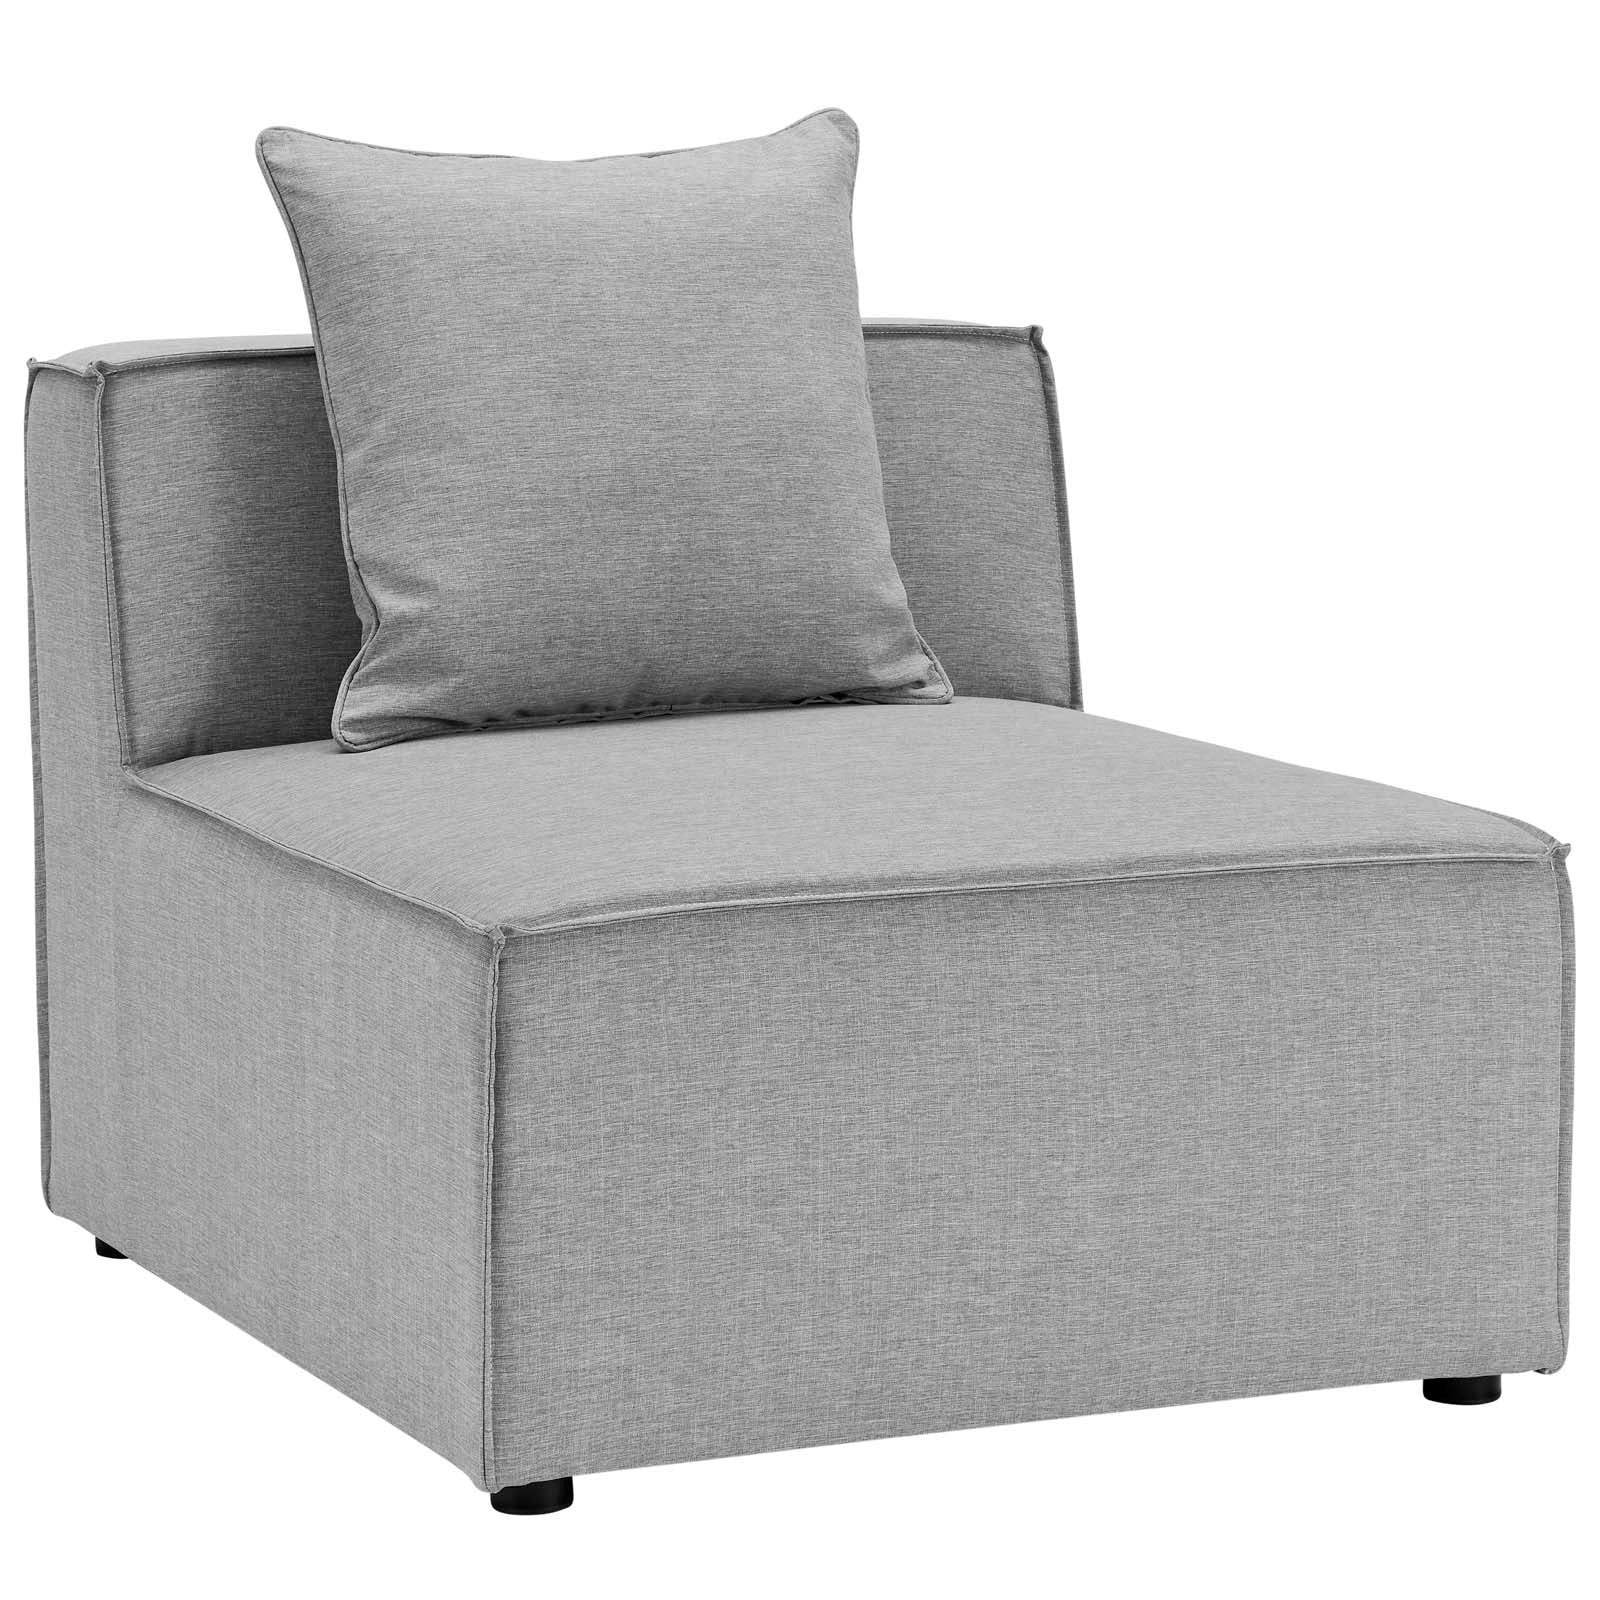 Modway Outdoor Sofas - Saybrook Outdoor Patio Upholstered 5-Piece Sectional Sofa Gray